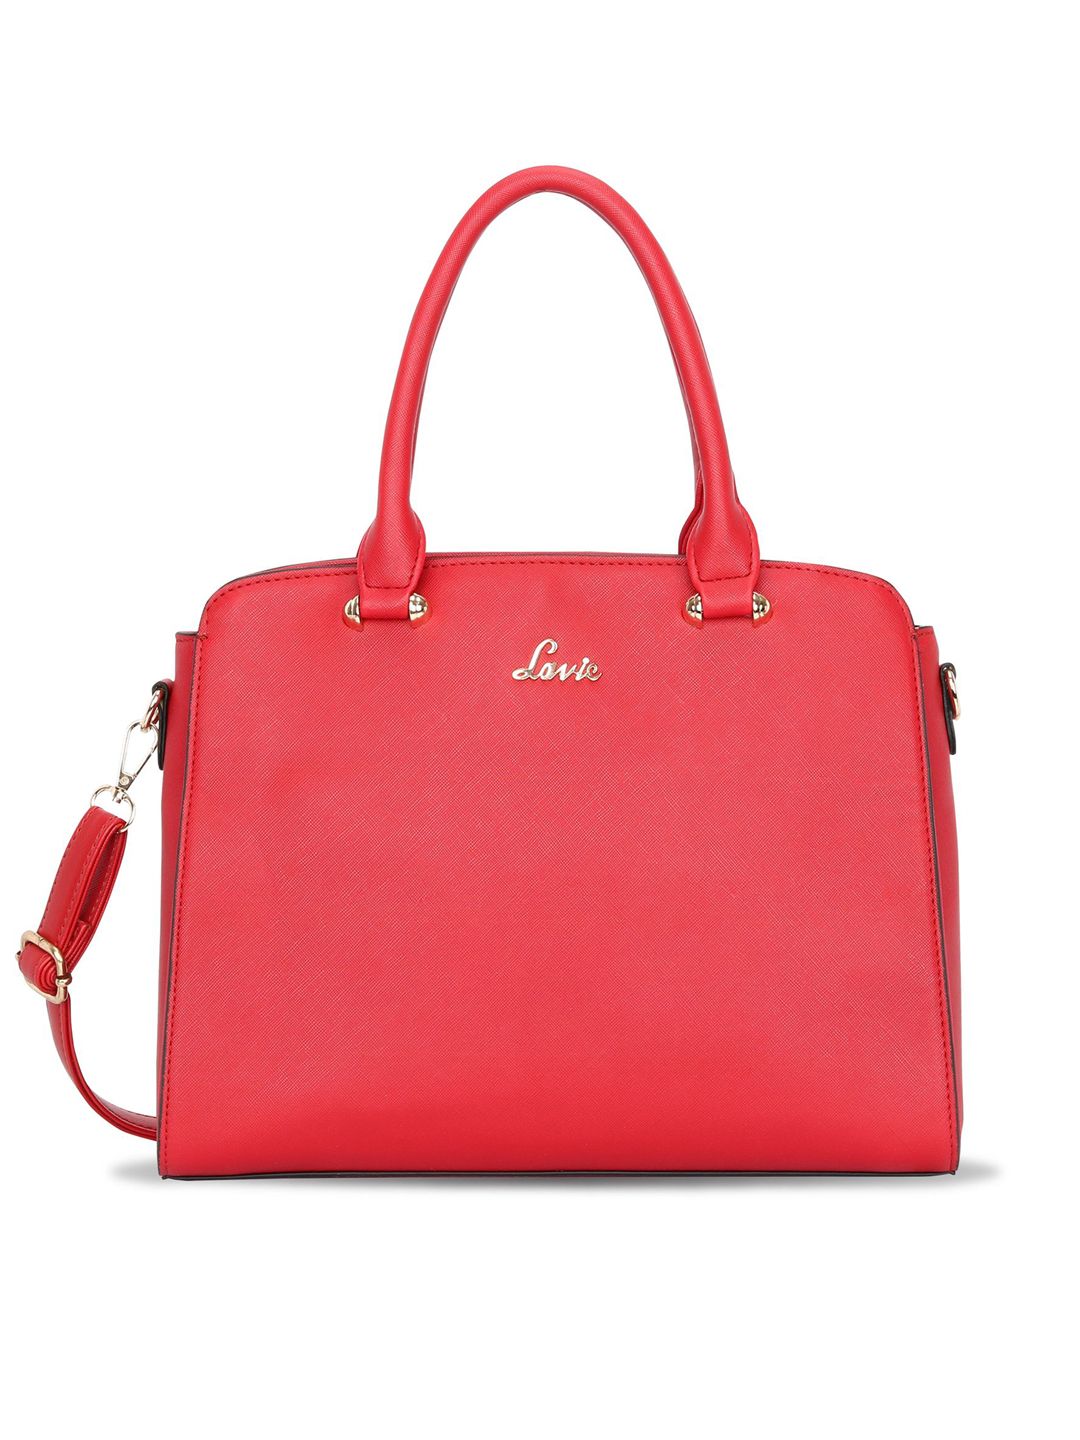 Lavie Women Red Saffiano Textured Structured Handheld Bag Price in India